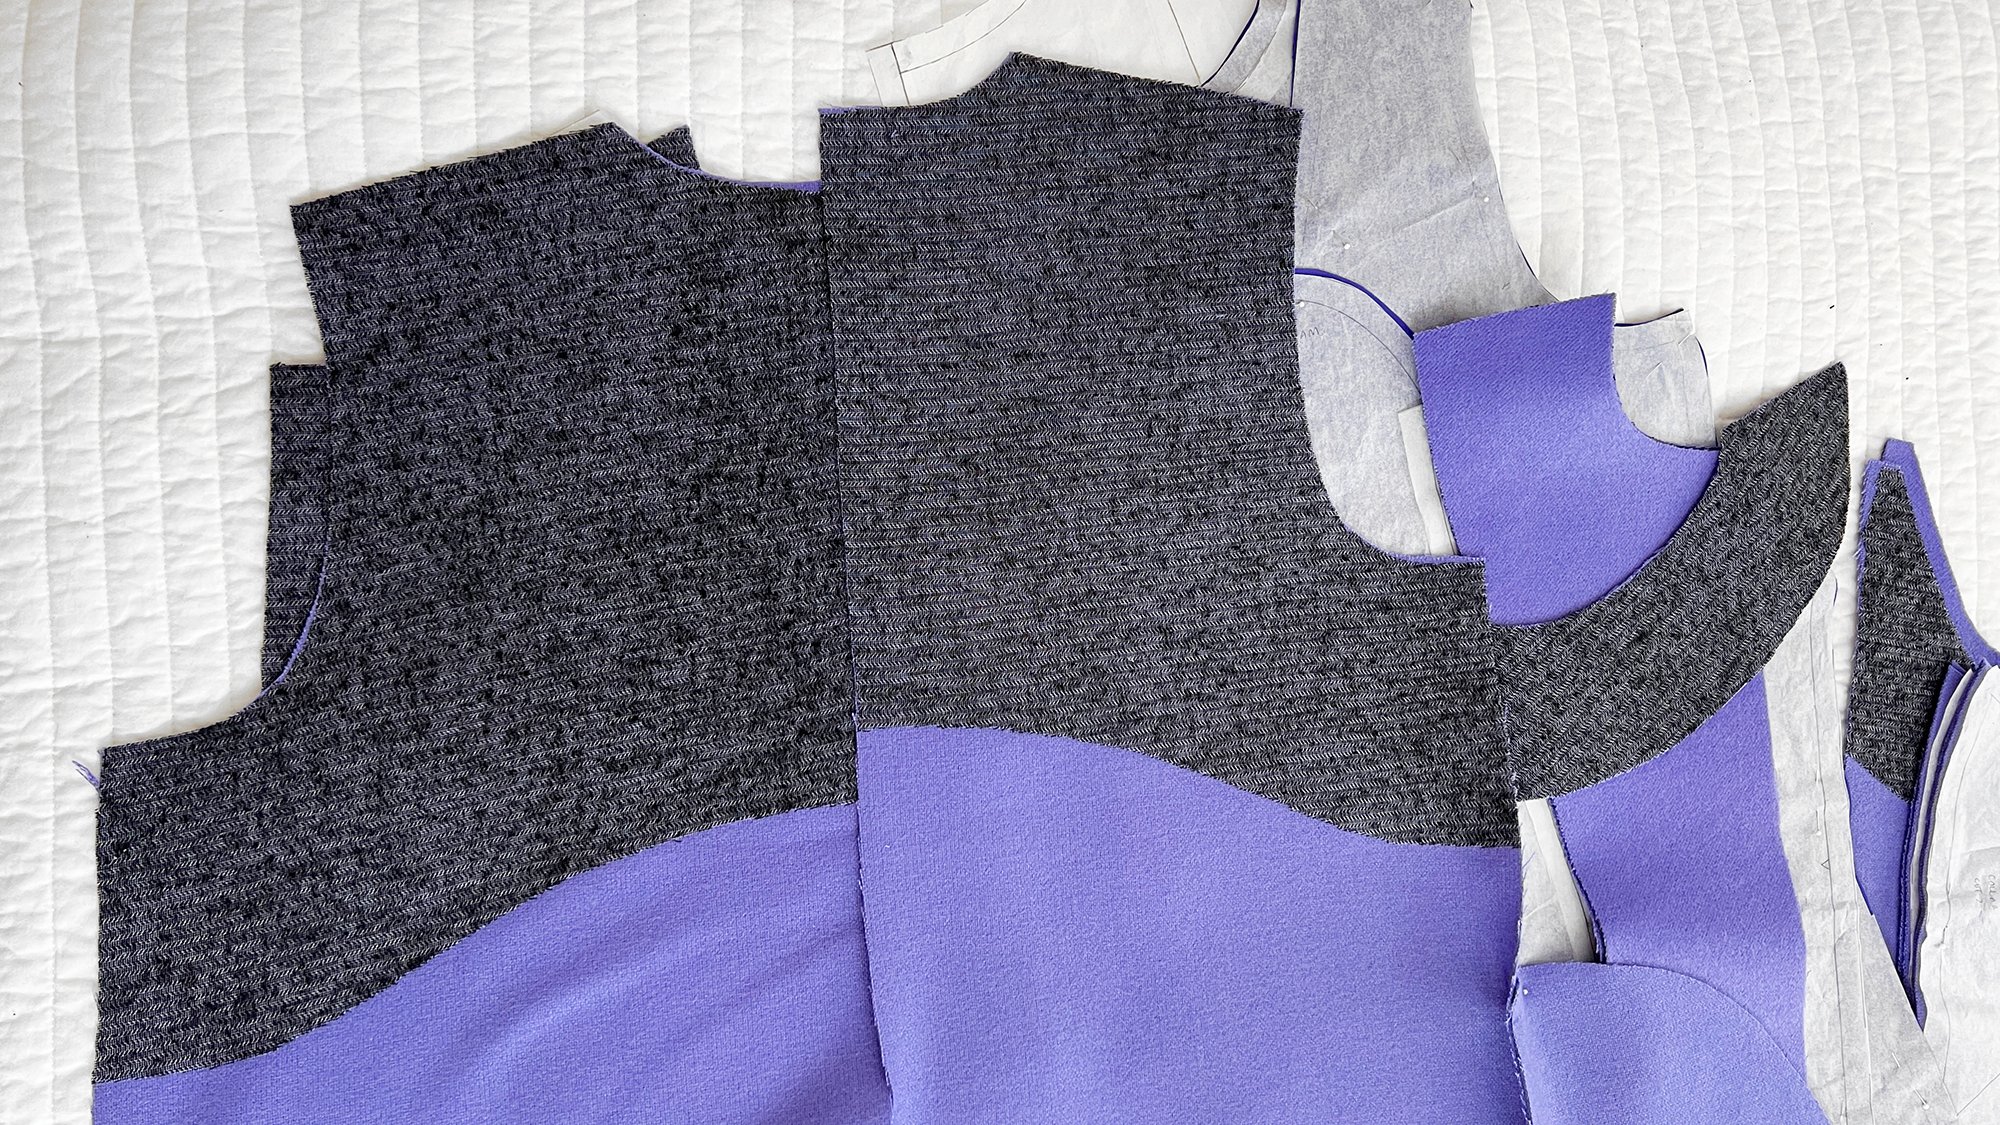 UNLIKELY: How to Tailor a Coat or Jacket with Fusible Interfacing